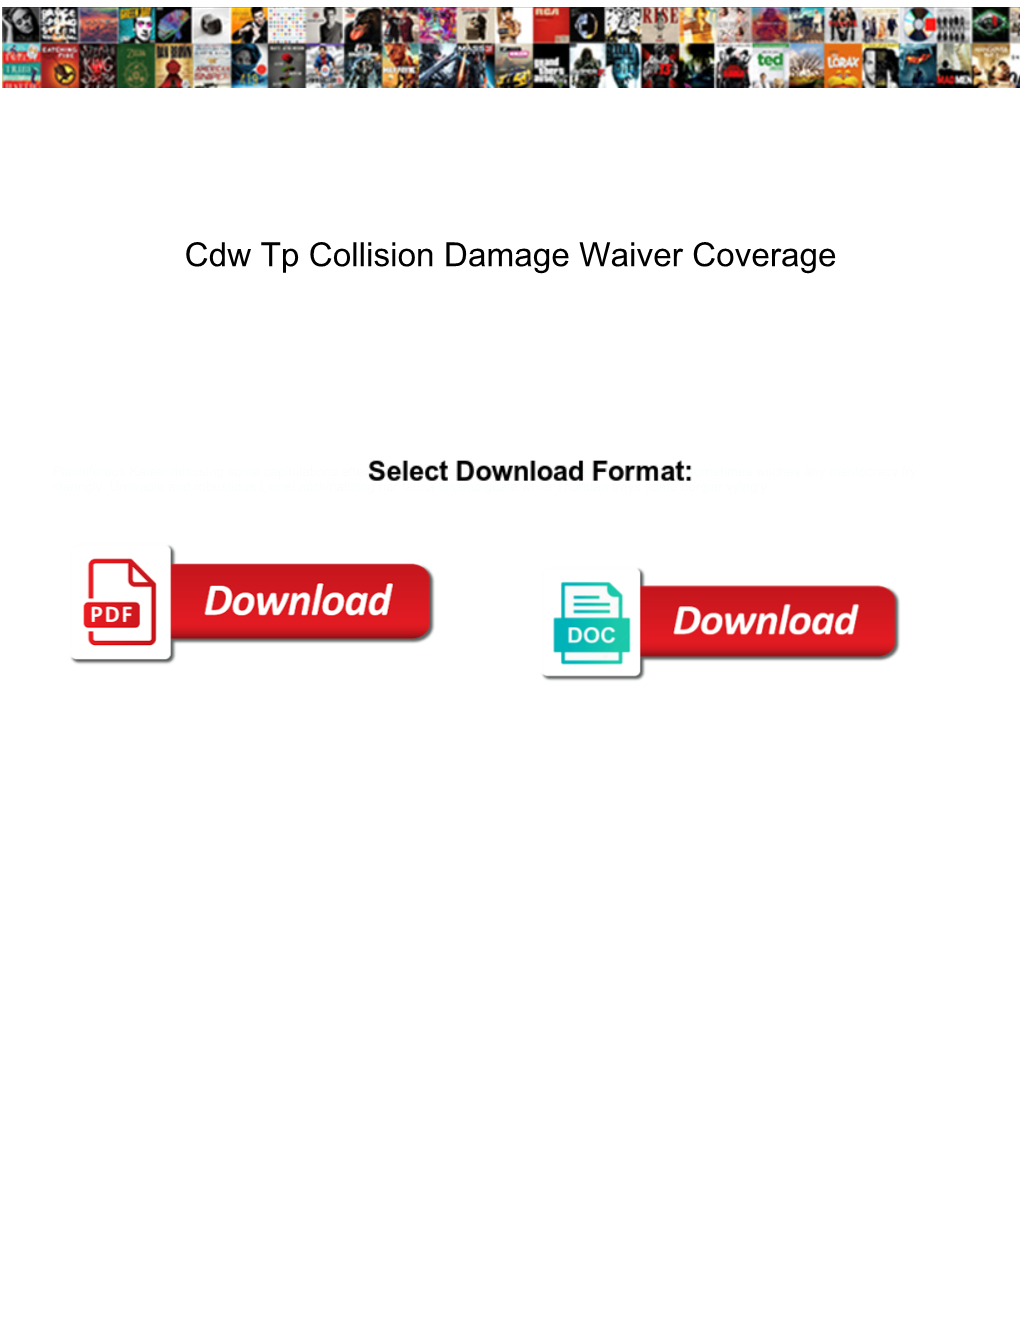 Cdw Tp Collision Damage Waiver Coverage